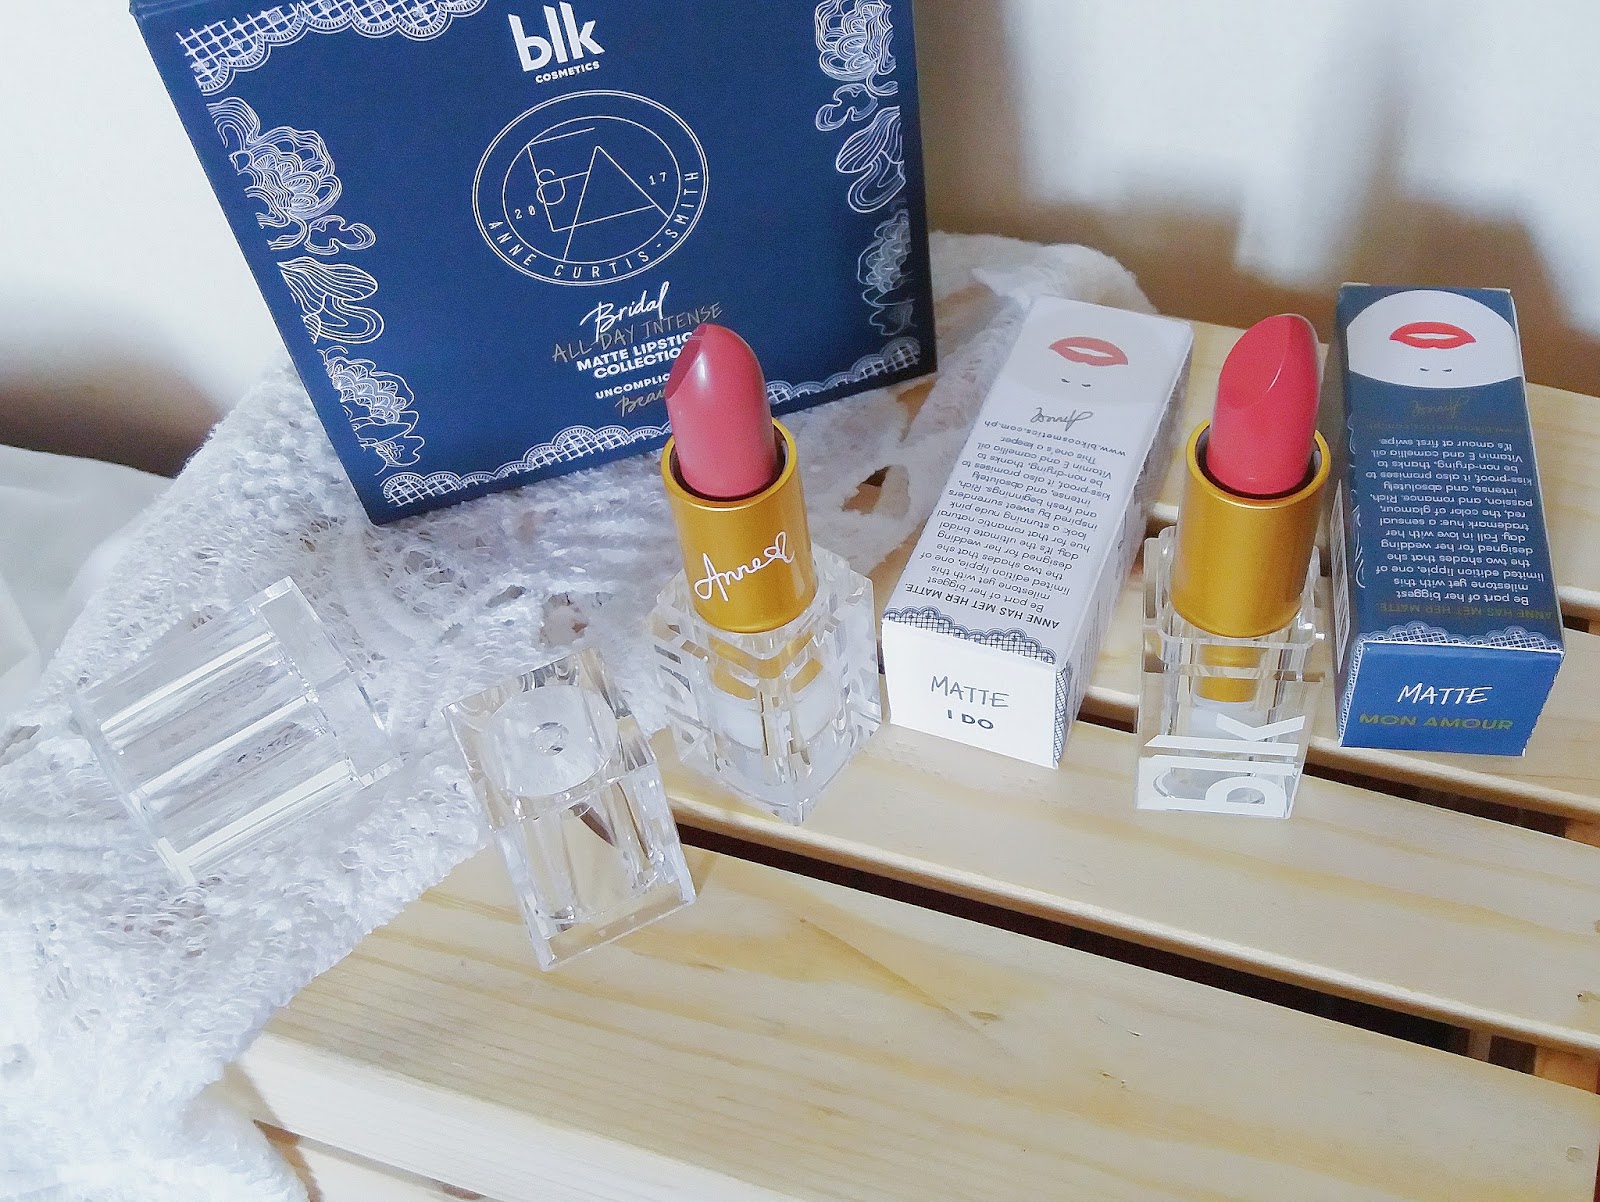 ANNE CURTIS' BLK BRIDAL LIPPIES LIMITED EDITION SWATCHES